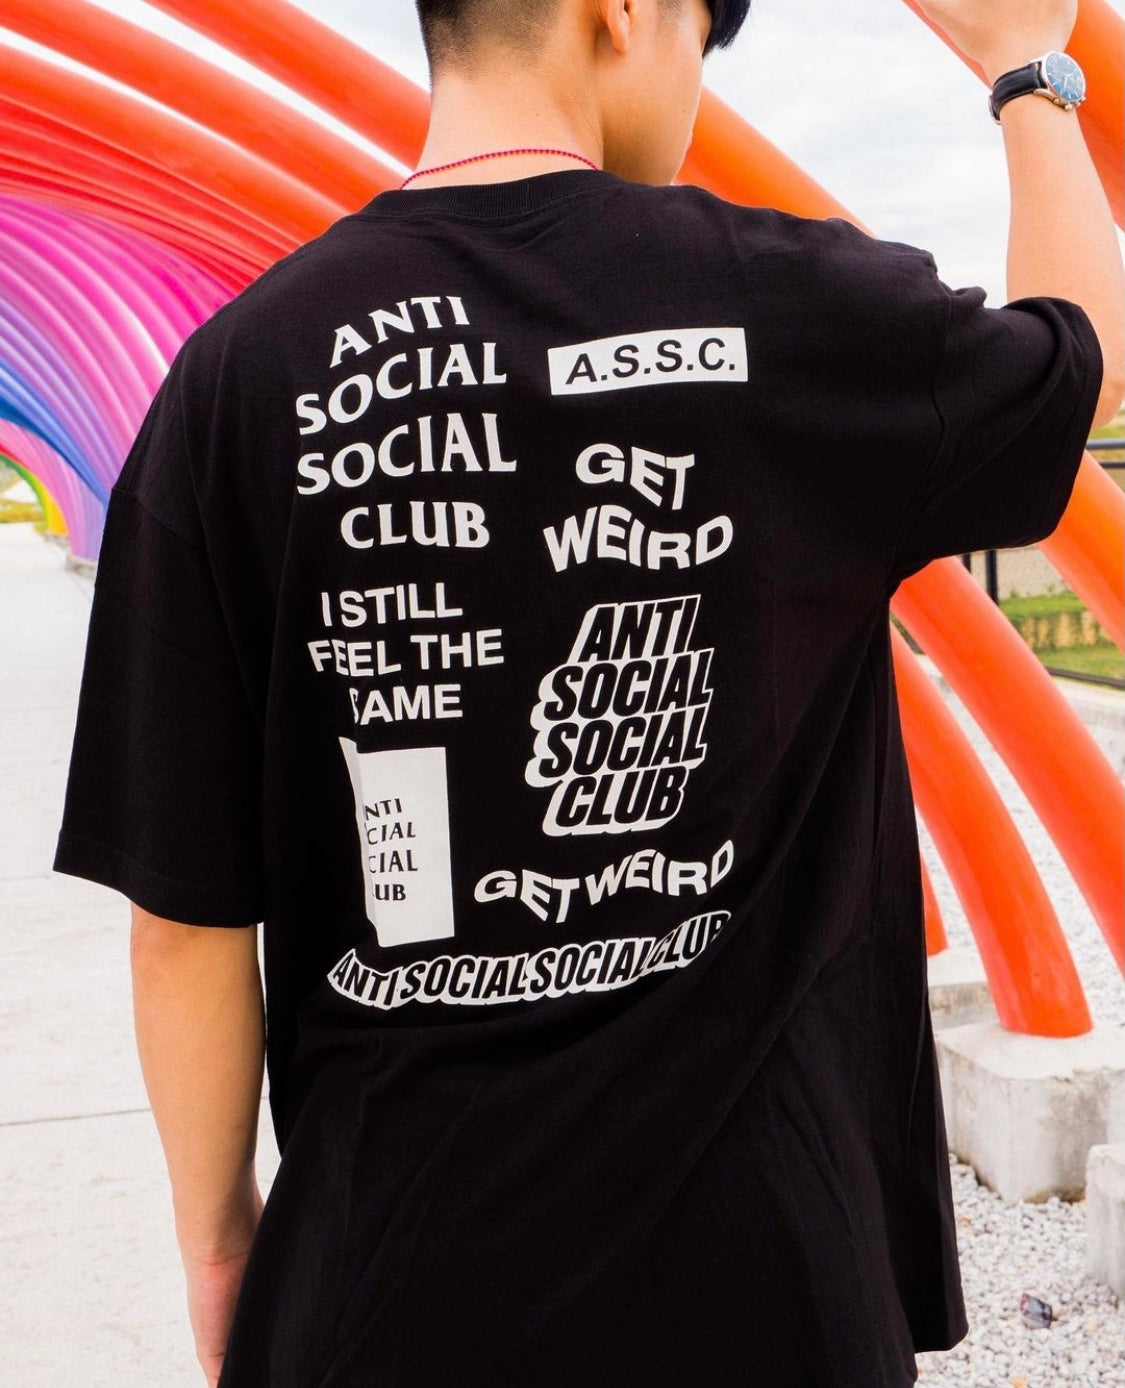 Anti Social Social Club Bukake T-Shirt ( Black Colour ) - Shop Streetwear, Sneakers, Slippers and Gifts online | Malaysia - The Factory KL